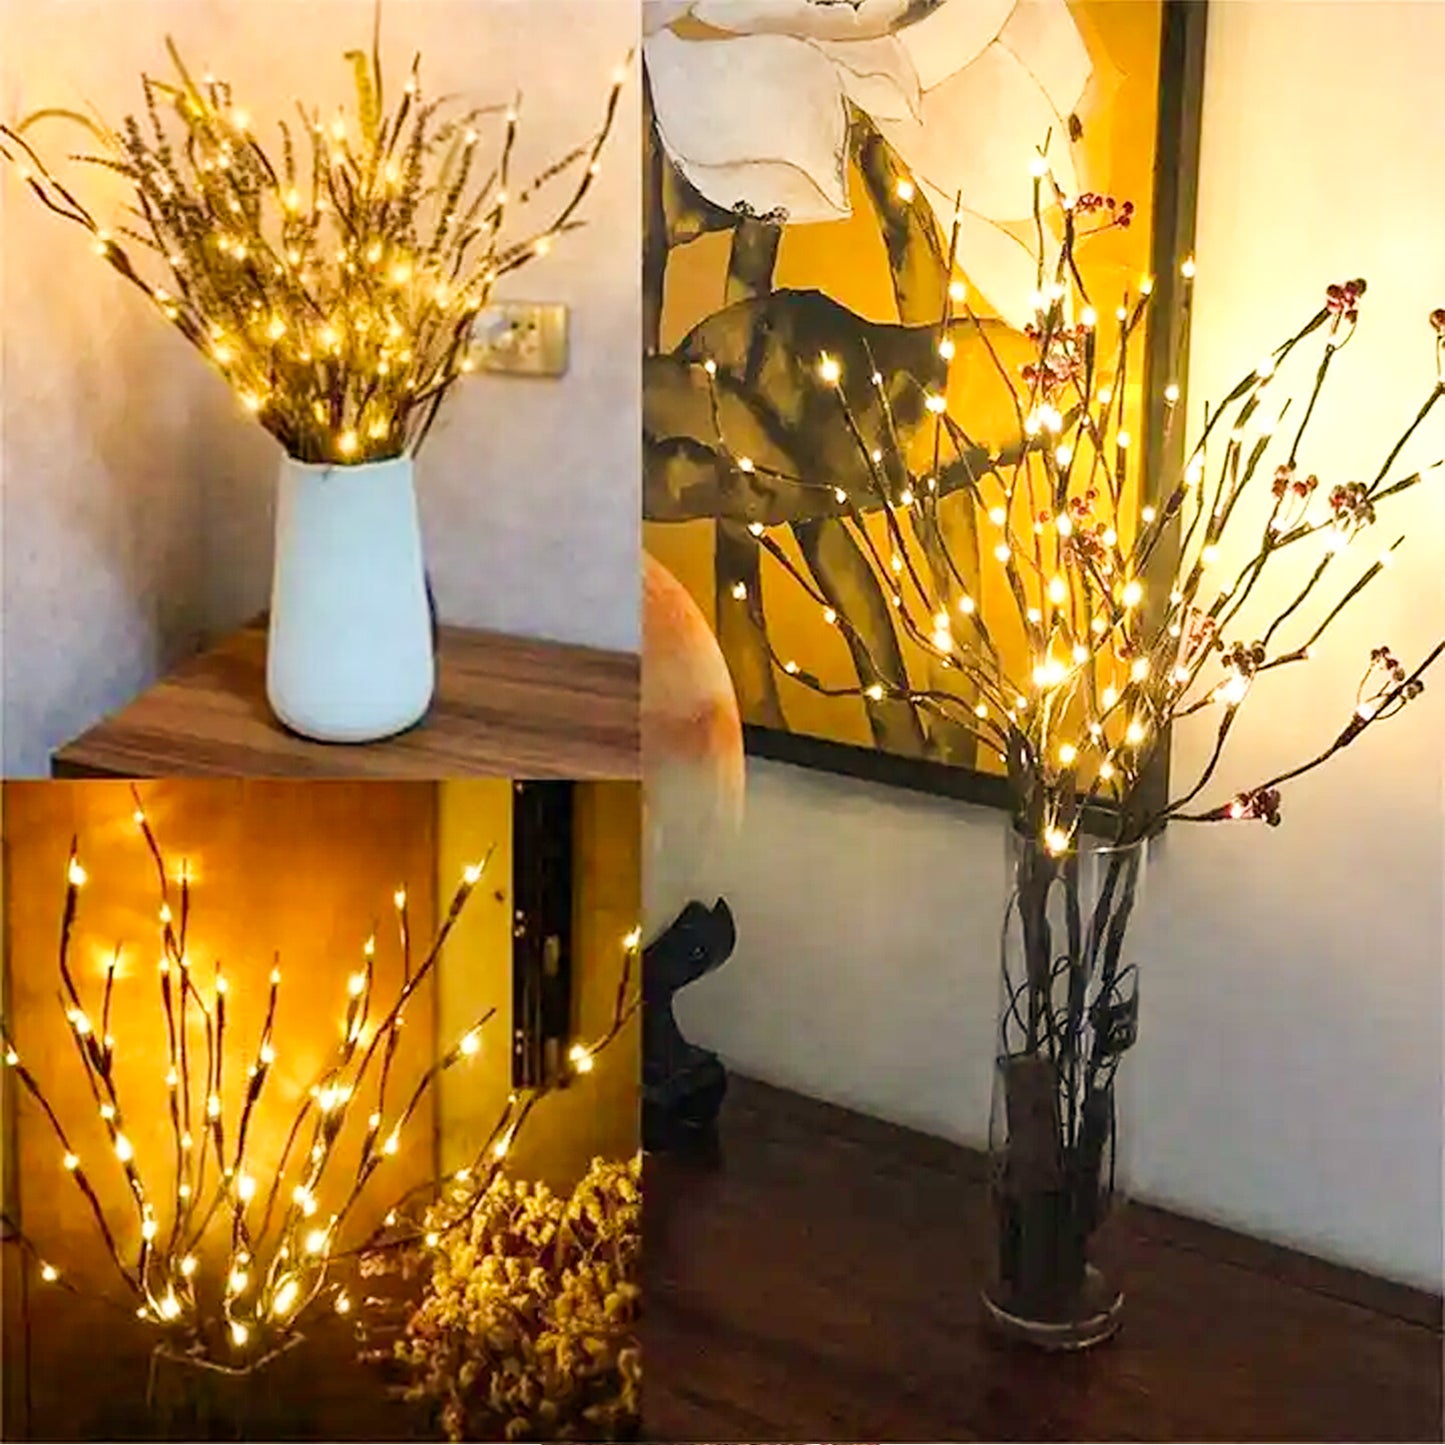 BAWHO LED Branches Lights,Plug in vase twig Tree lamp Living Room Decorations Mood Lighting Warm White with vioce Remote